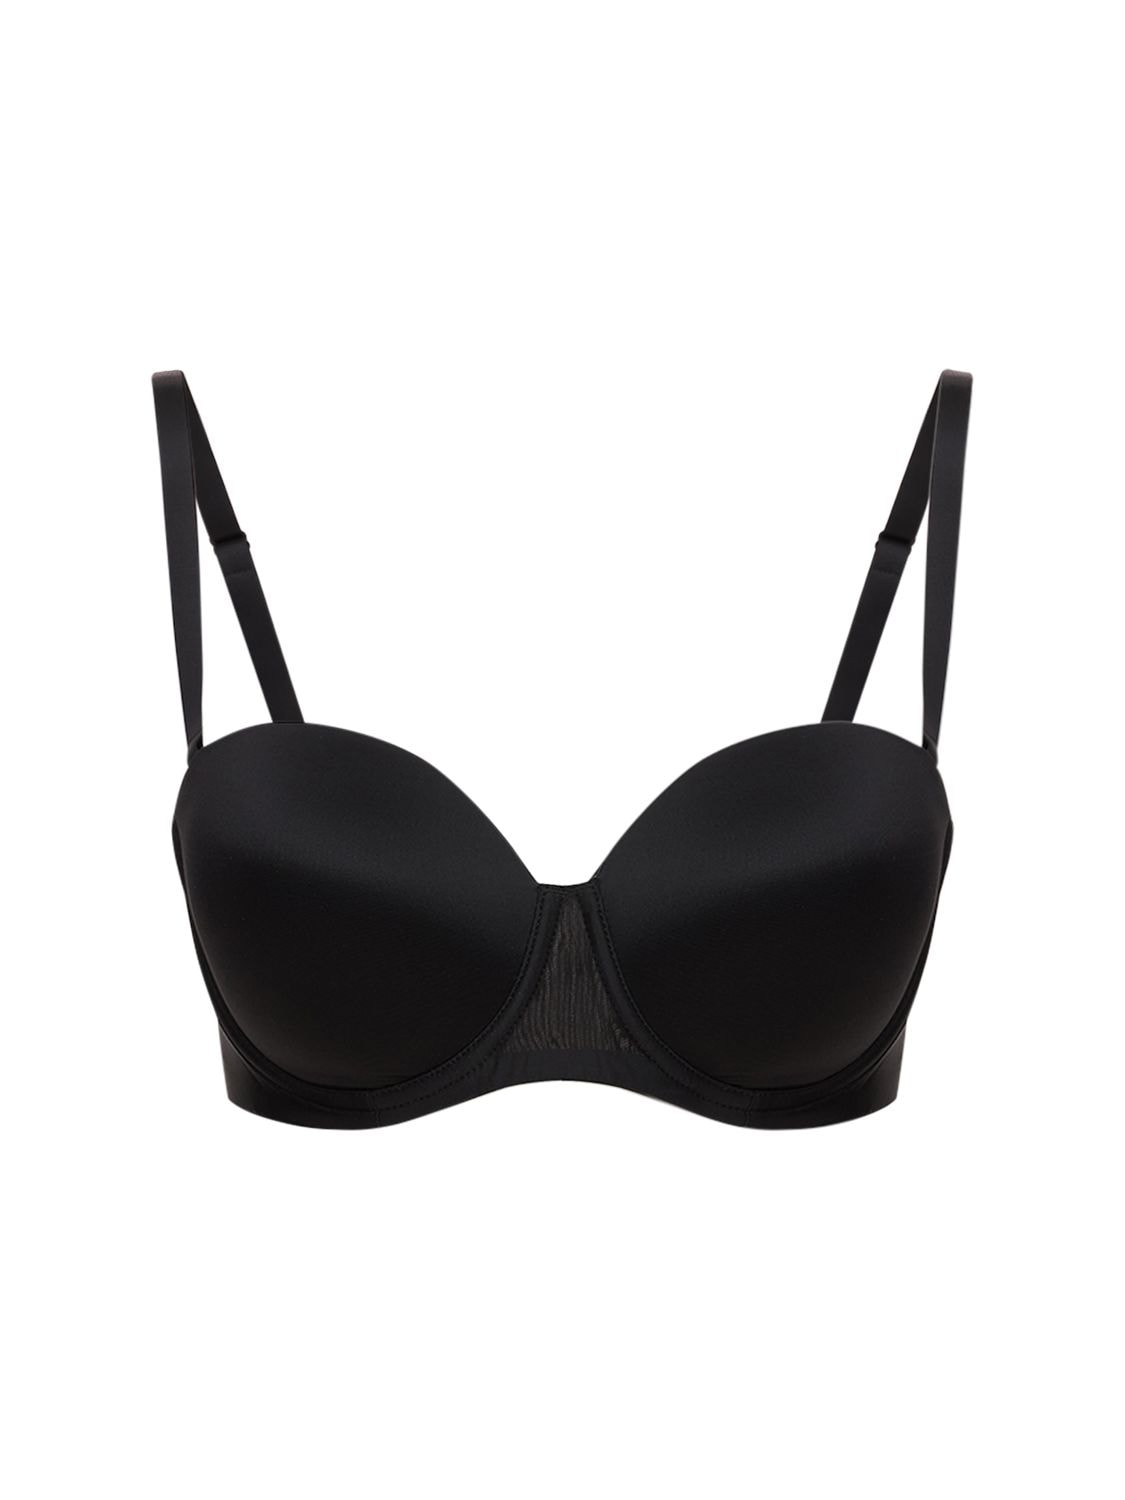 WOLFORD SHEER TOUCH UNDERWIRED BANDEAU BRA,75IVOP064-NZAWNQ2